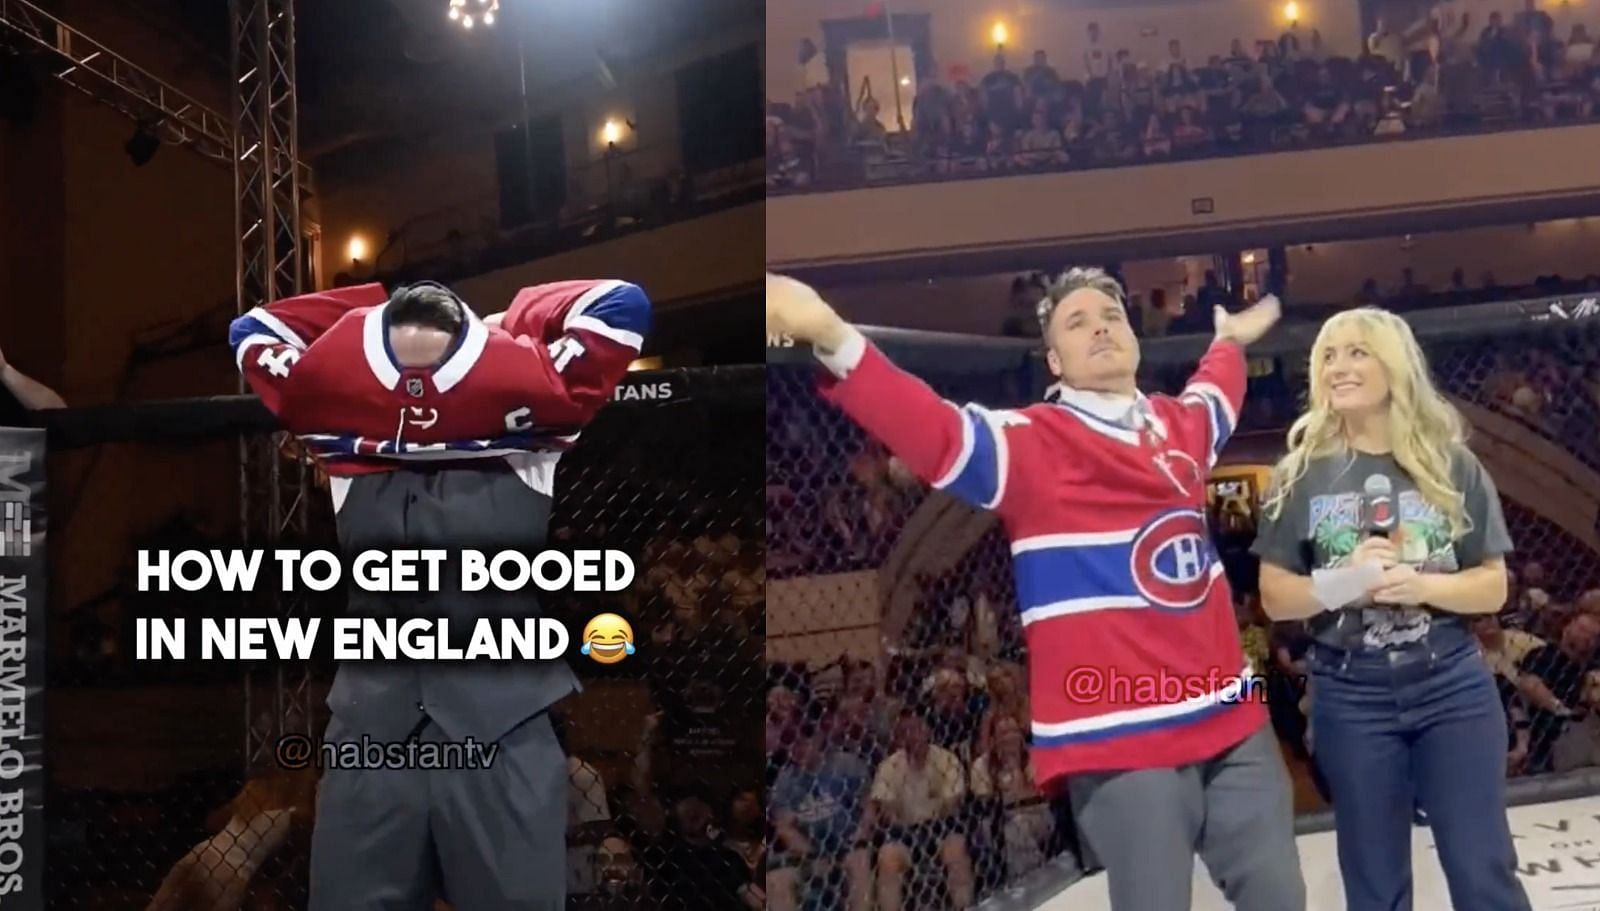 MMA fighter riles up Bruins fans by wearing Canadiens jersey ahead of fight in Massachusetts